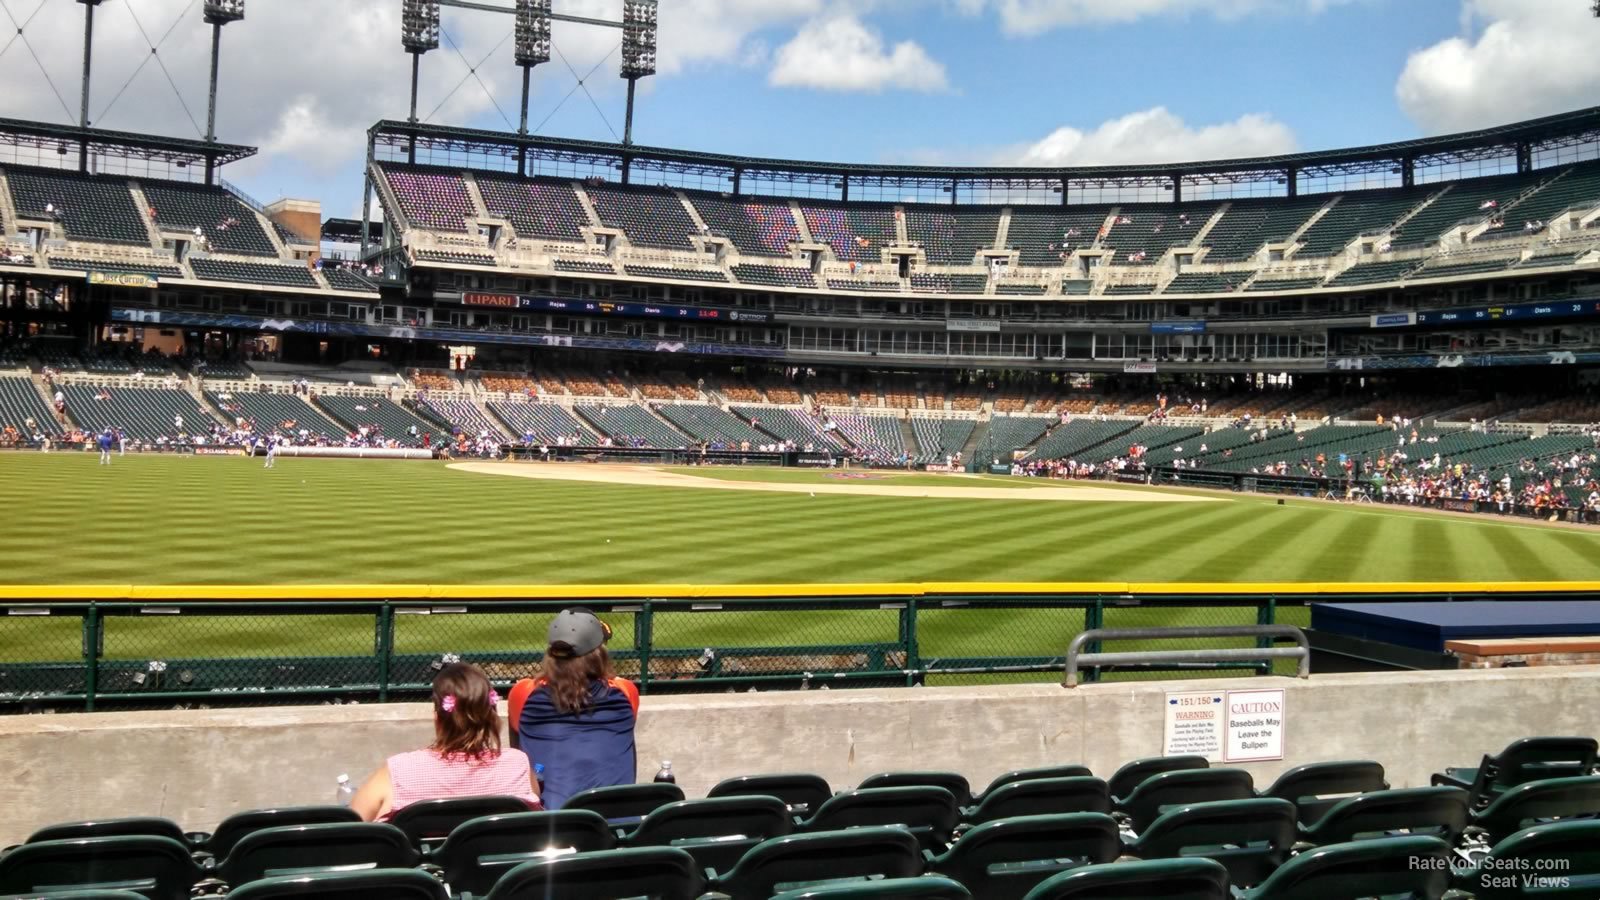 section 151, row g seat view  for baseball - comerica park